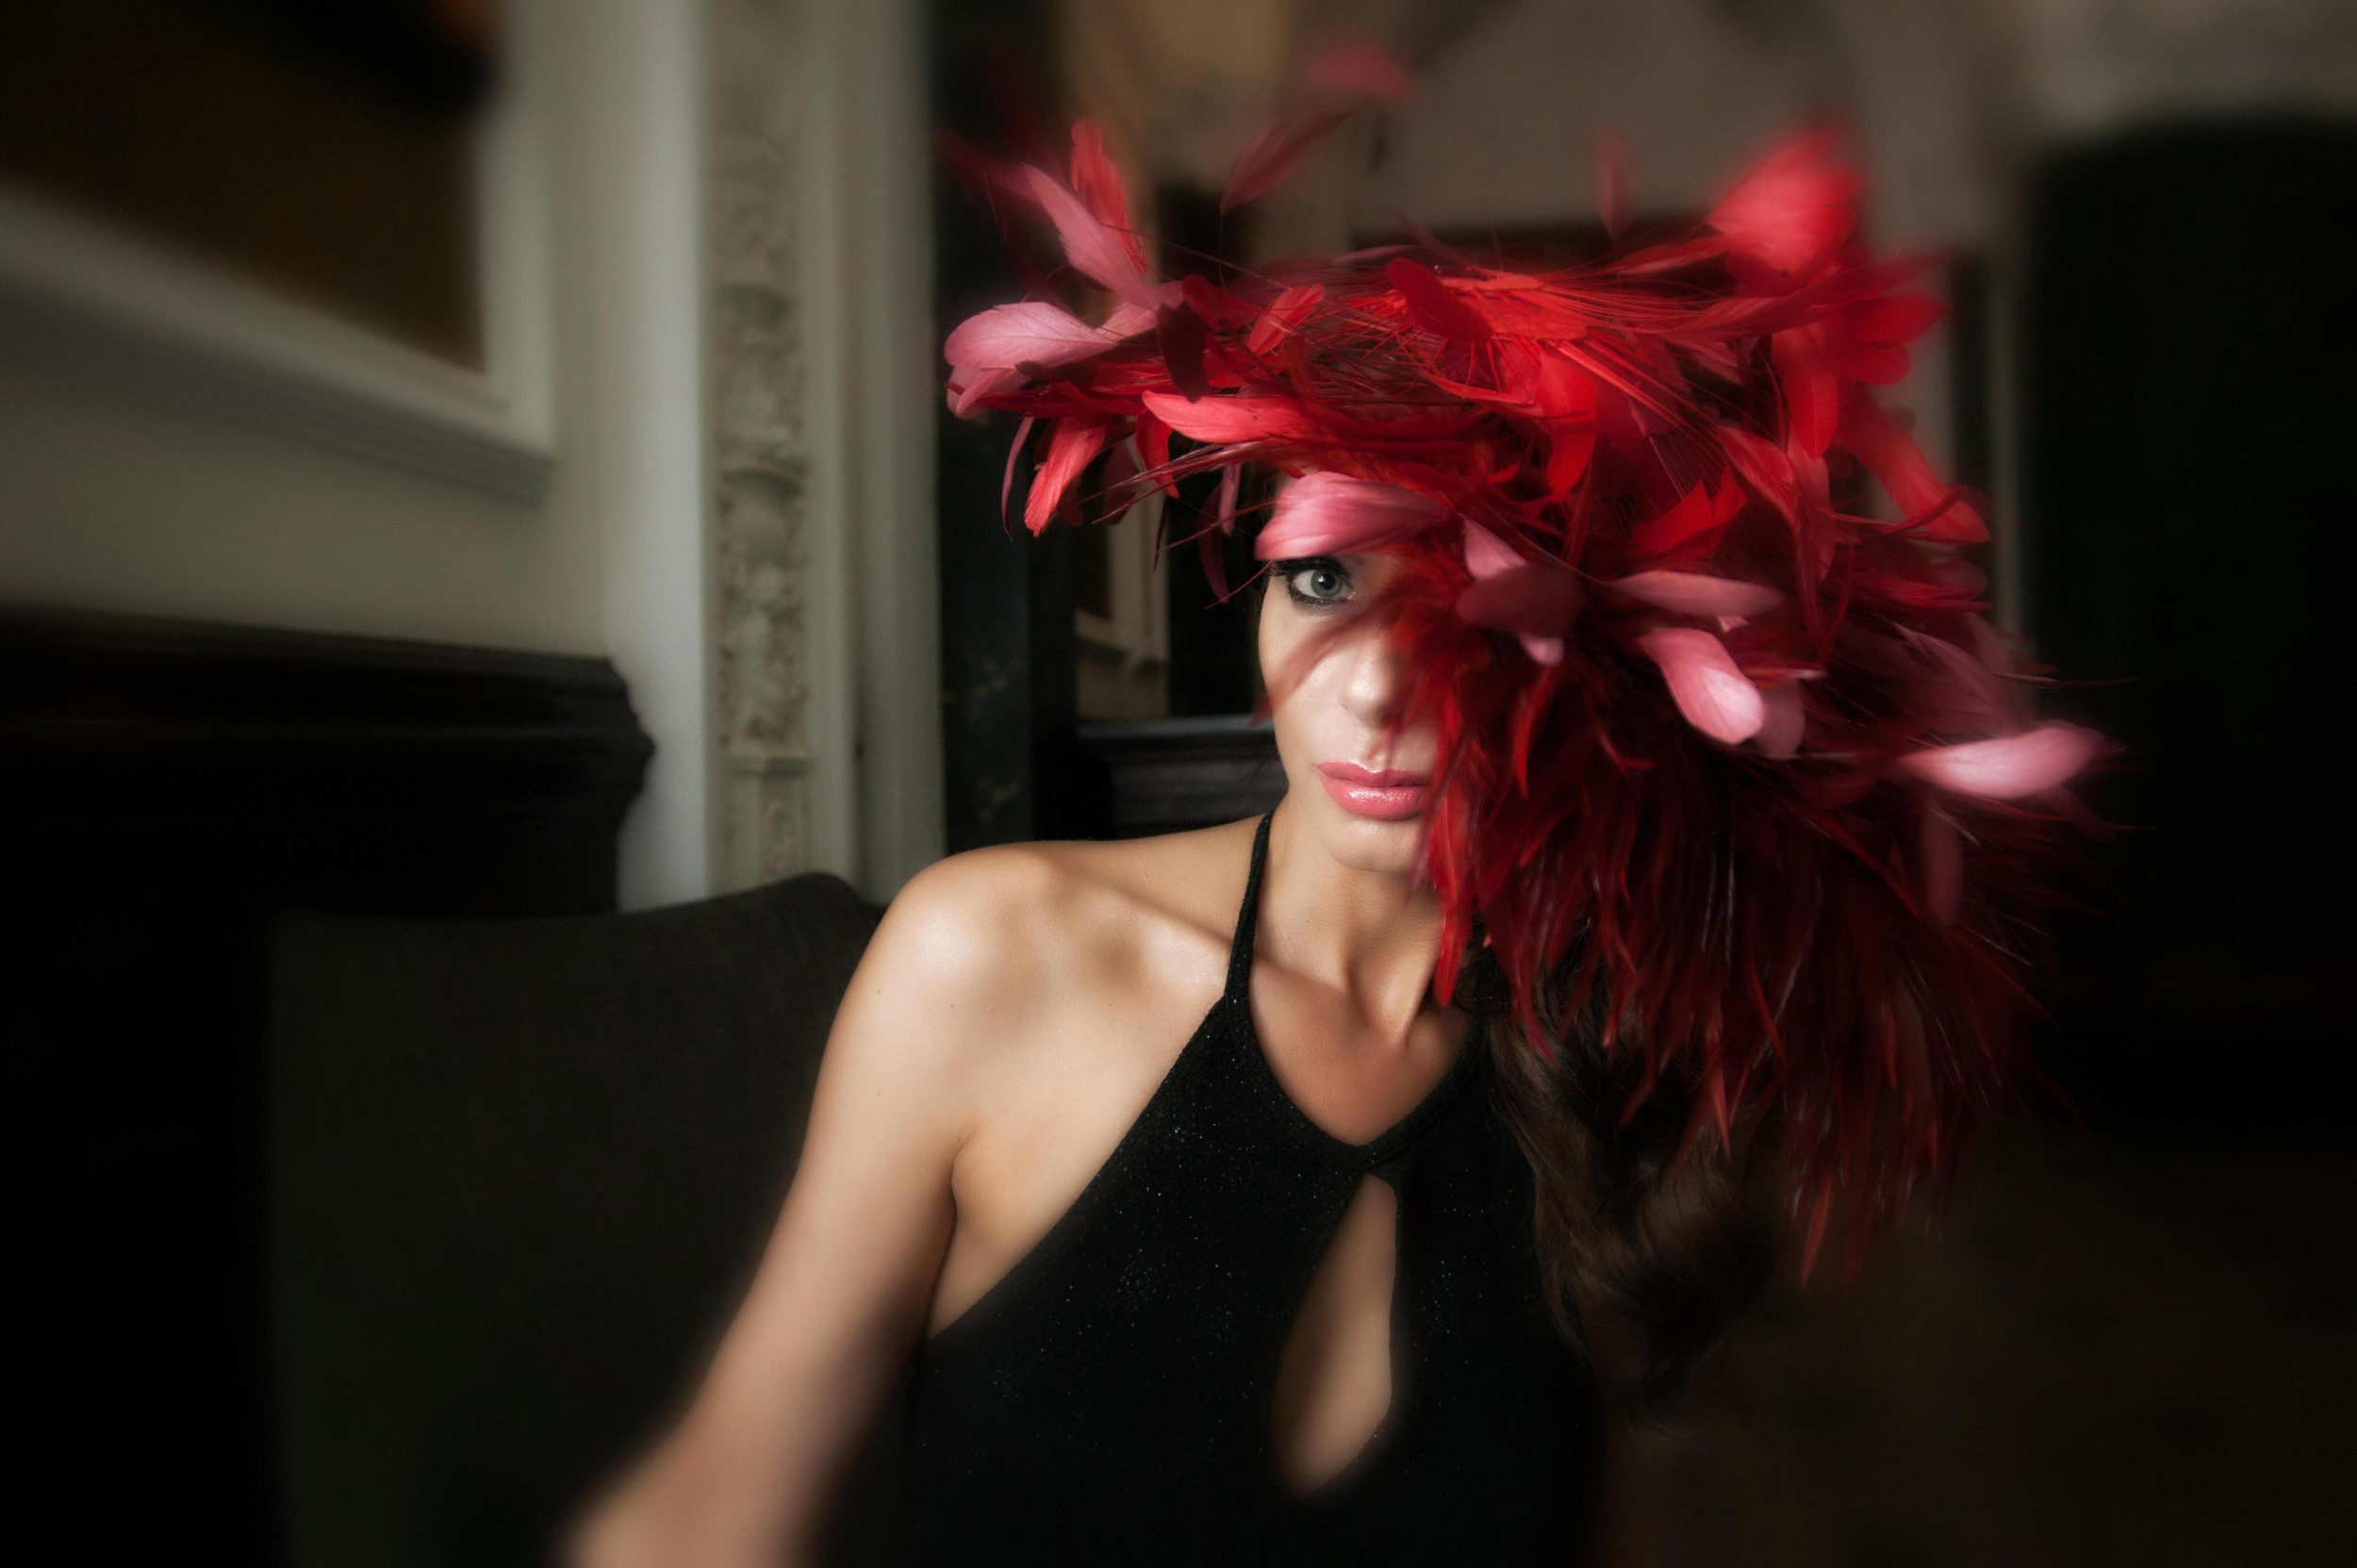 The art of millinery